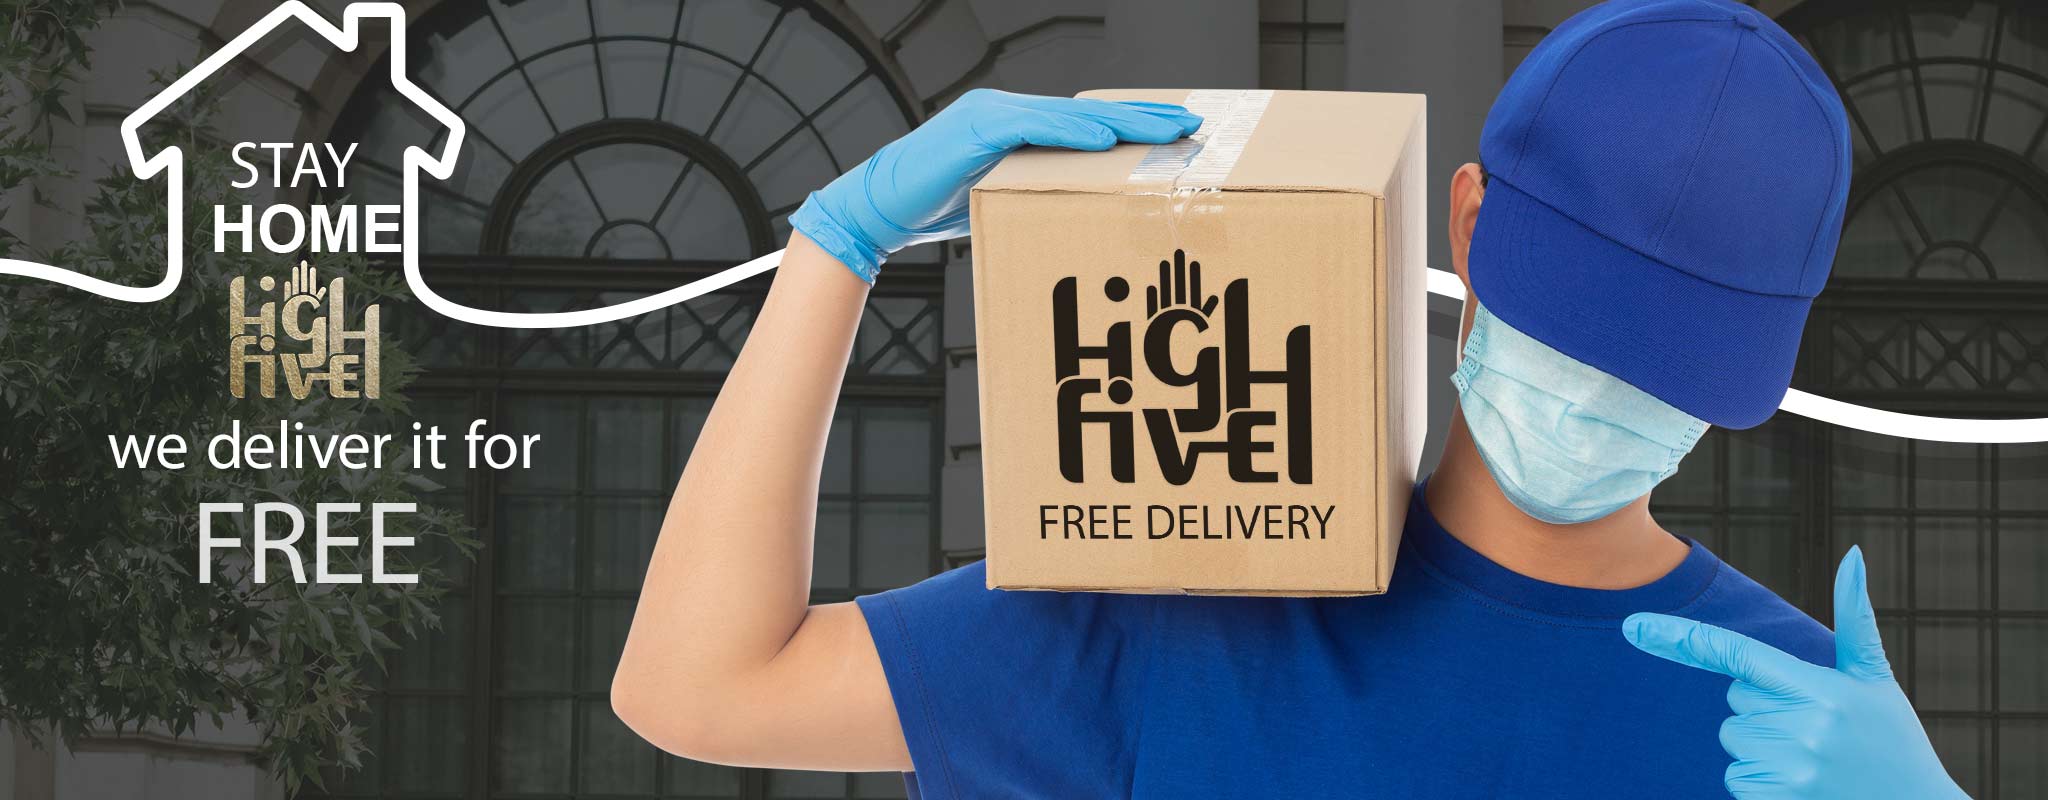 Free Delivery UAE